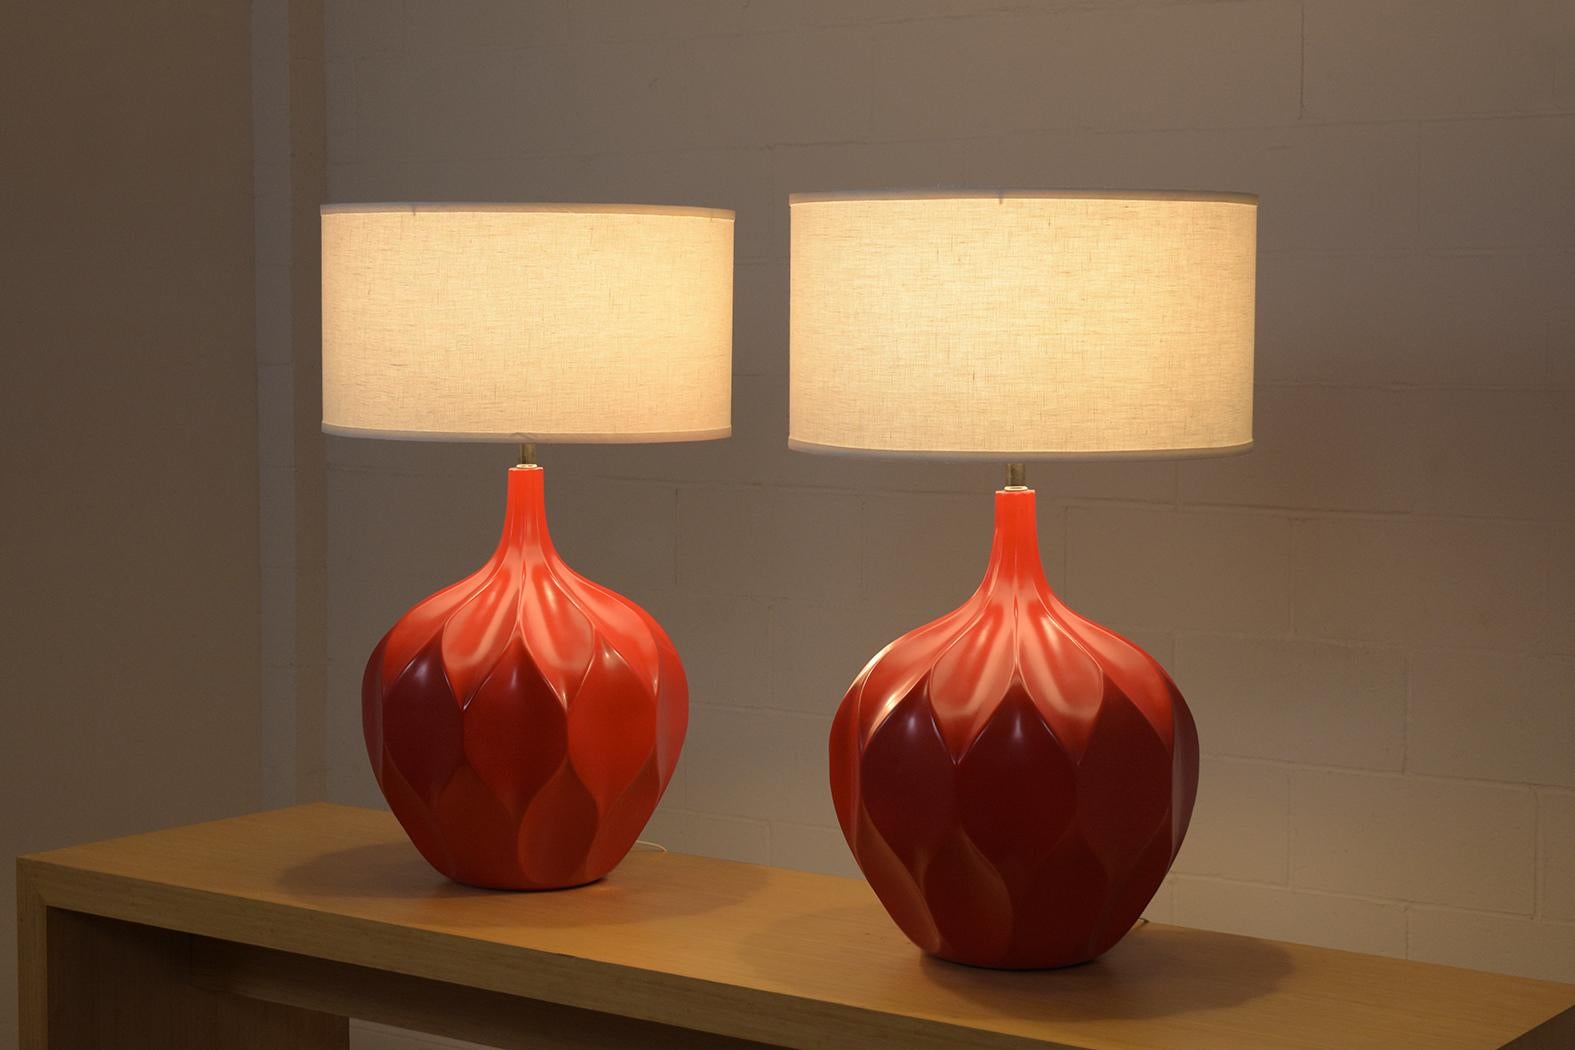 Elevate your space with our handcrafted vintage table lamps from the 1960s. These ceramic beauties, brought back to life by our skilled in-house team, are the epitome of mid-century modern elegance. In great condition, their sphere shape boasts a